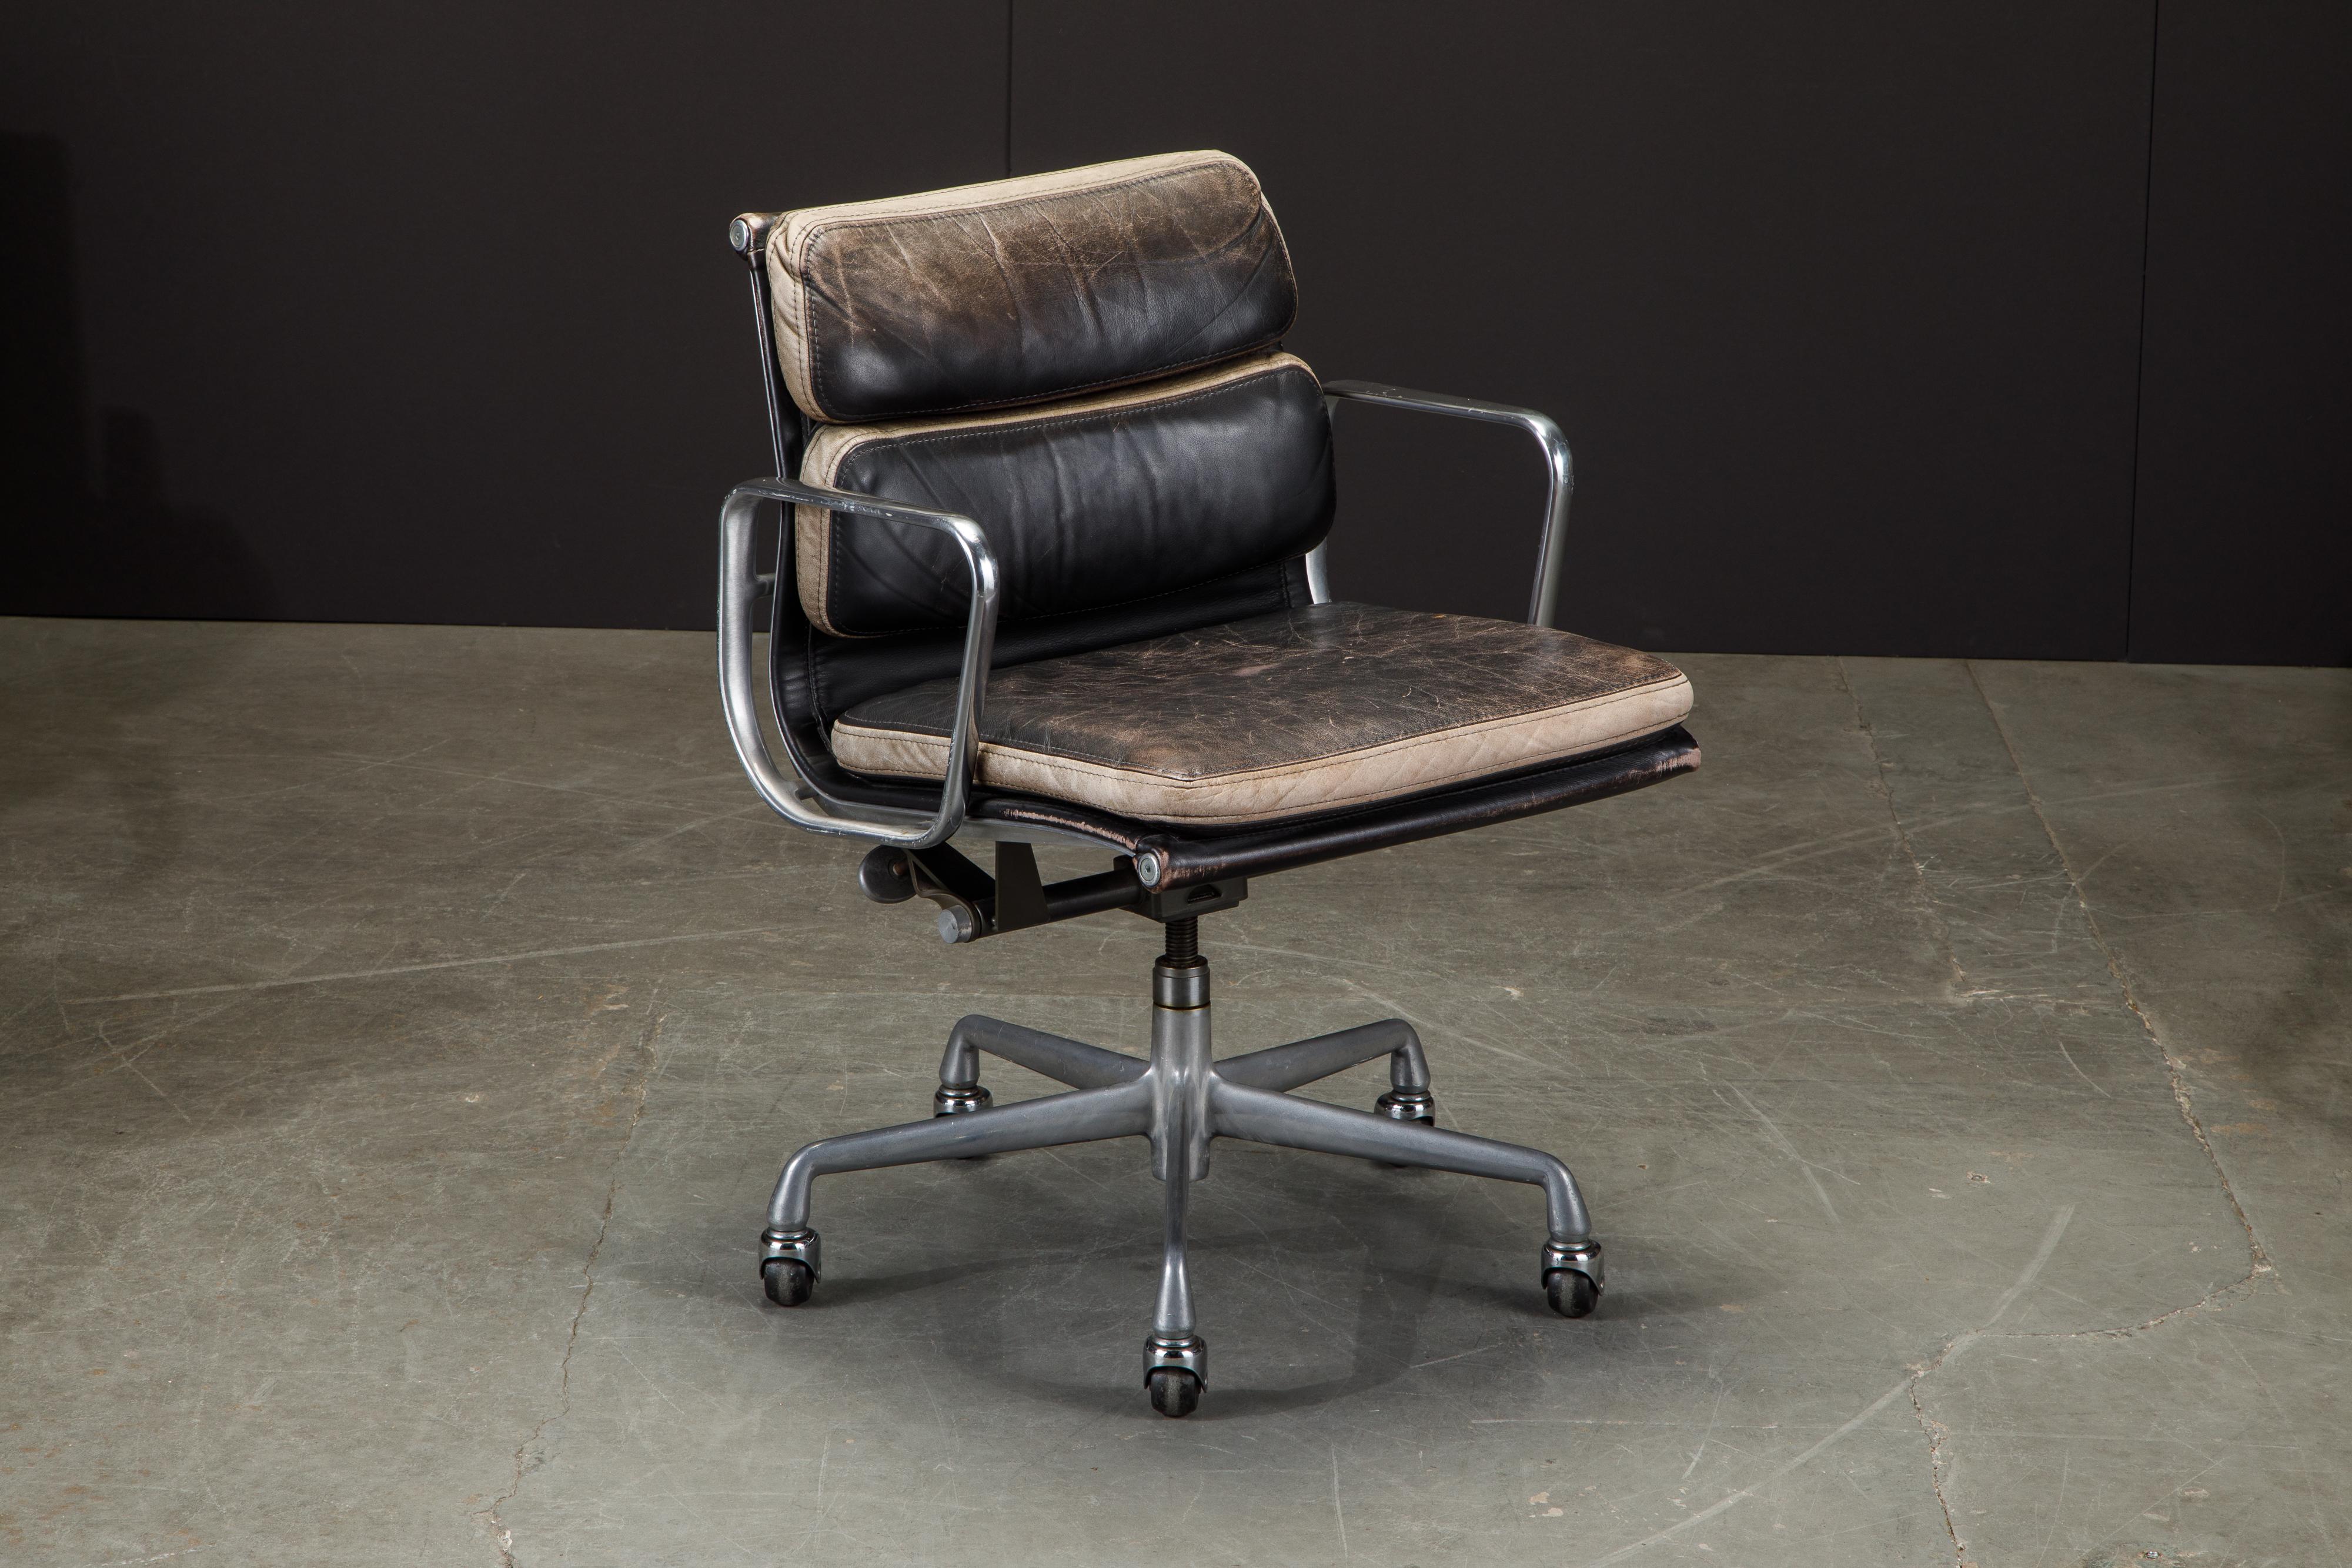 Leather Patinated Soft Pad Desk Chairs by Charles Eames for Herman Miller, 1987, Signed